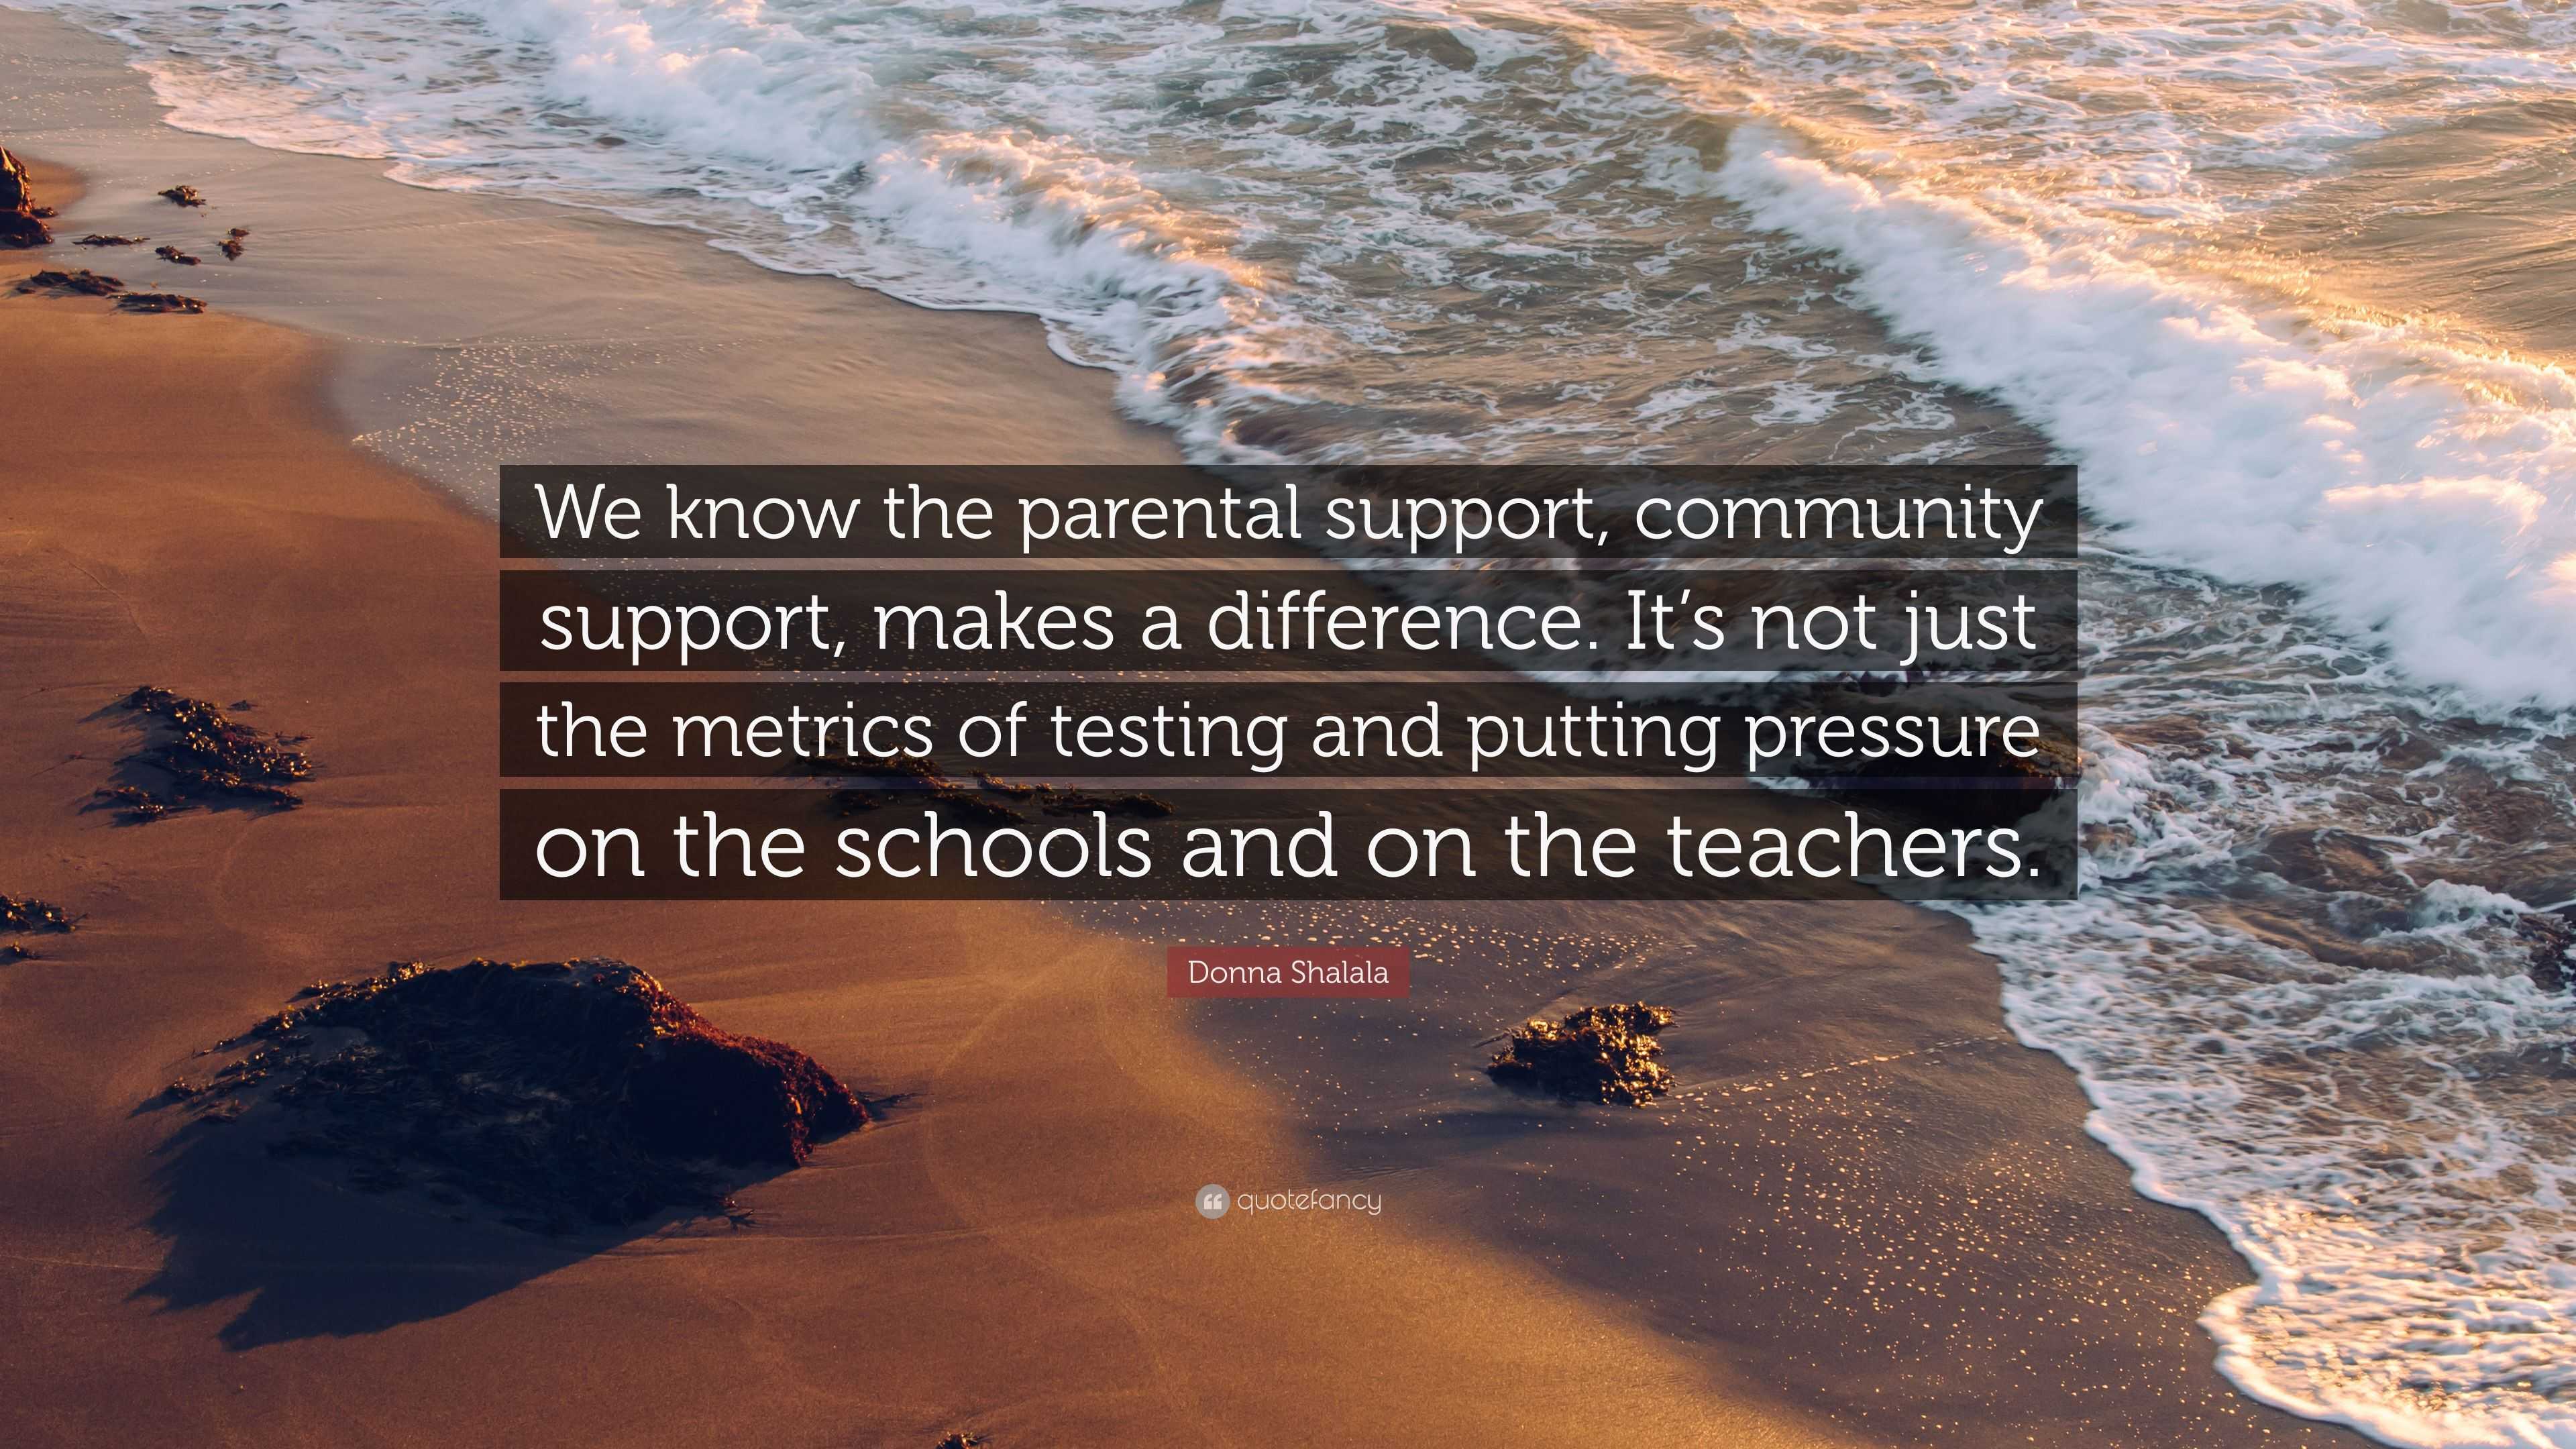 Donna Shalala Quote “We know the parental support